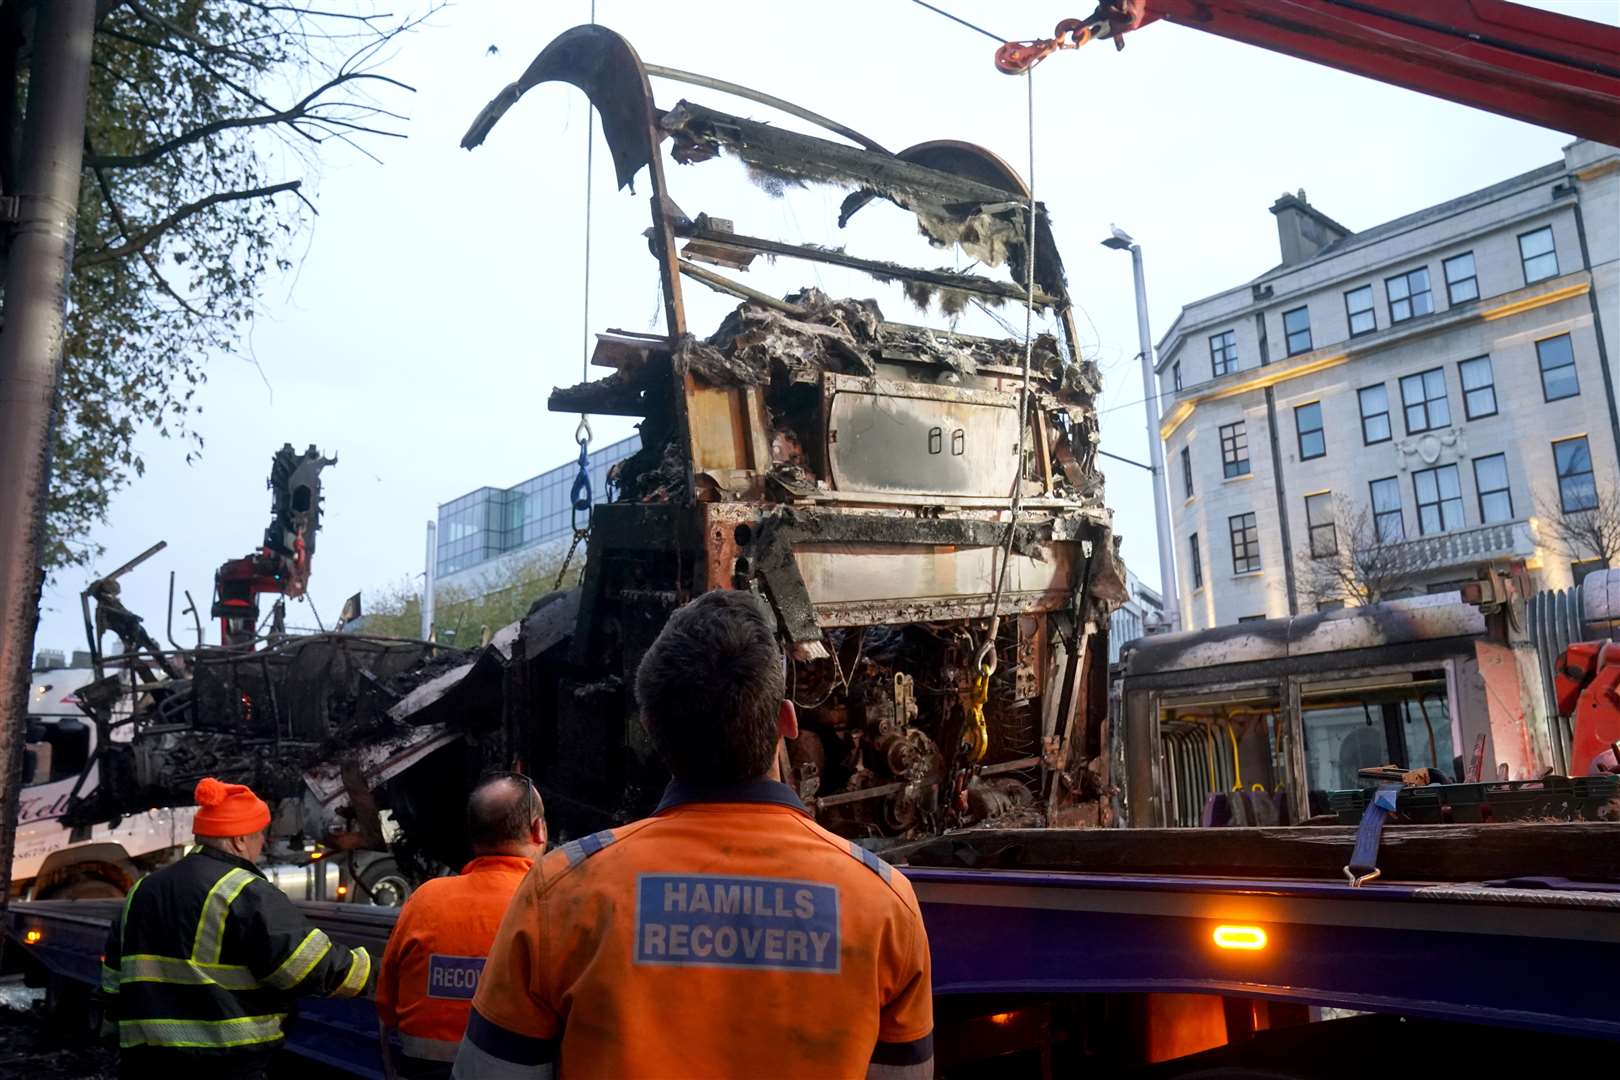 A burned out bus is removed from O’Connell Street in Dublin (Brian Lawless/PA)